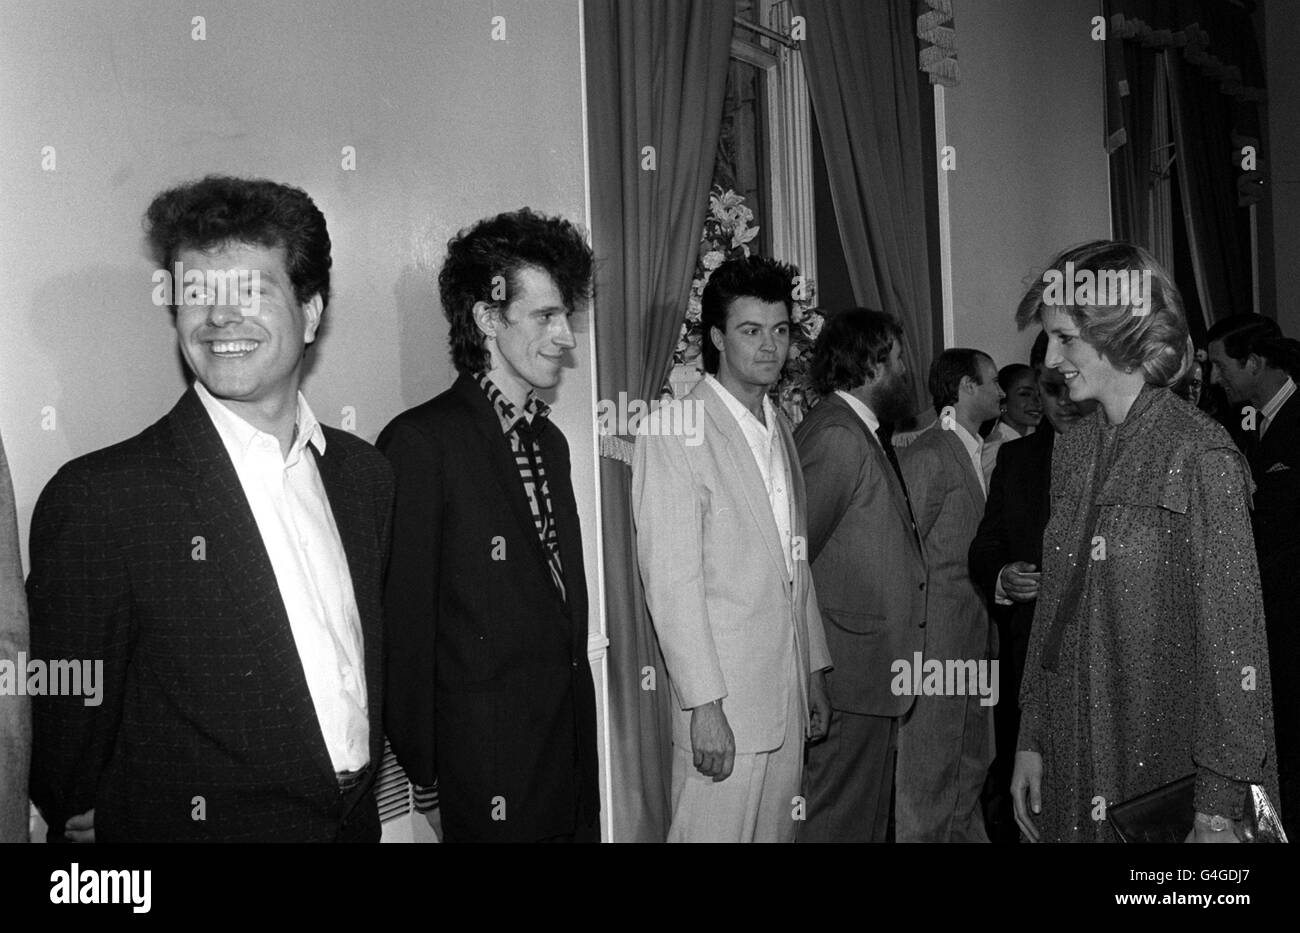 PA NEWS PHOTO 8/6/84  THE PRINCESS OF WALES GREETS POP STARS IN THE FOYET OF THE ROYAL ALBERT HALL IN LONDON BEFORE A POP CONCERT. FROM LEFT TO RIGHT: MARK PINDER, STEVE BOLTON AND PAUL YOUNG MEMBERS OF THE LEAD SINGER GROUP 'THE ROYAL FAMILY' Stock Photo